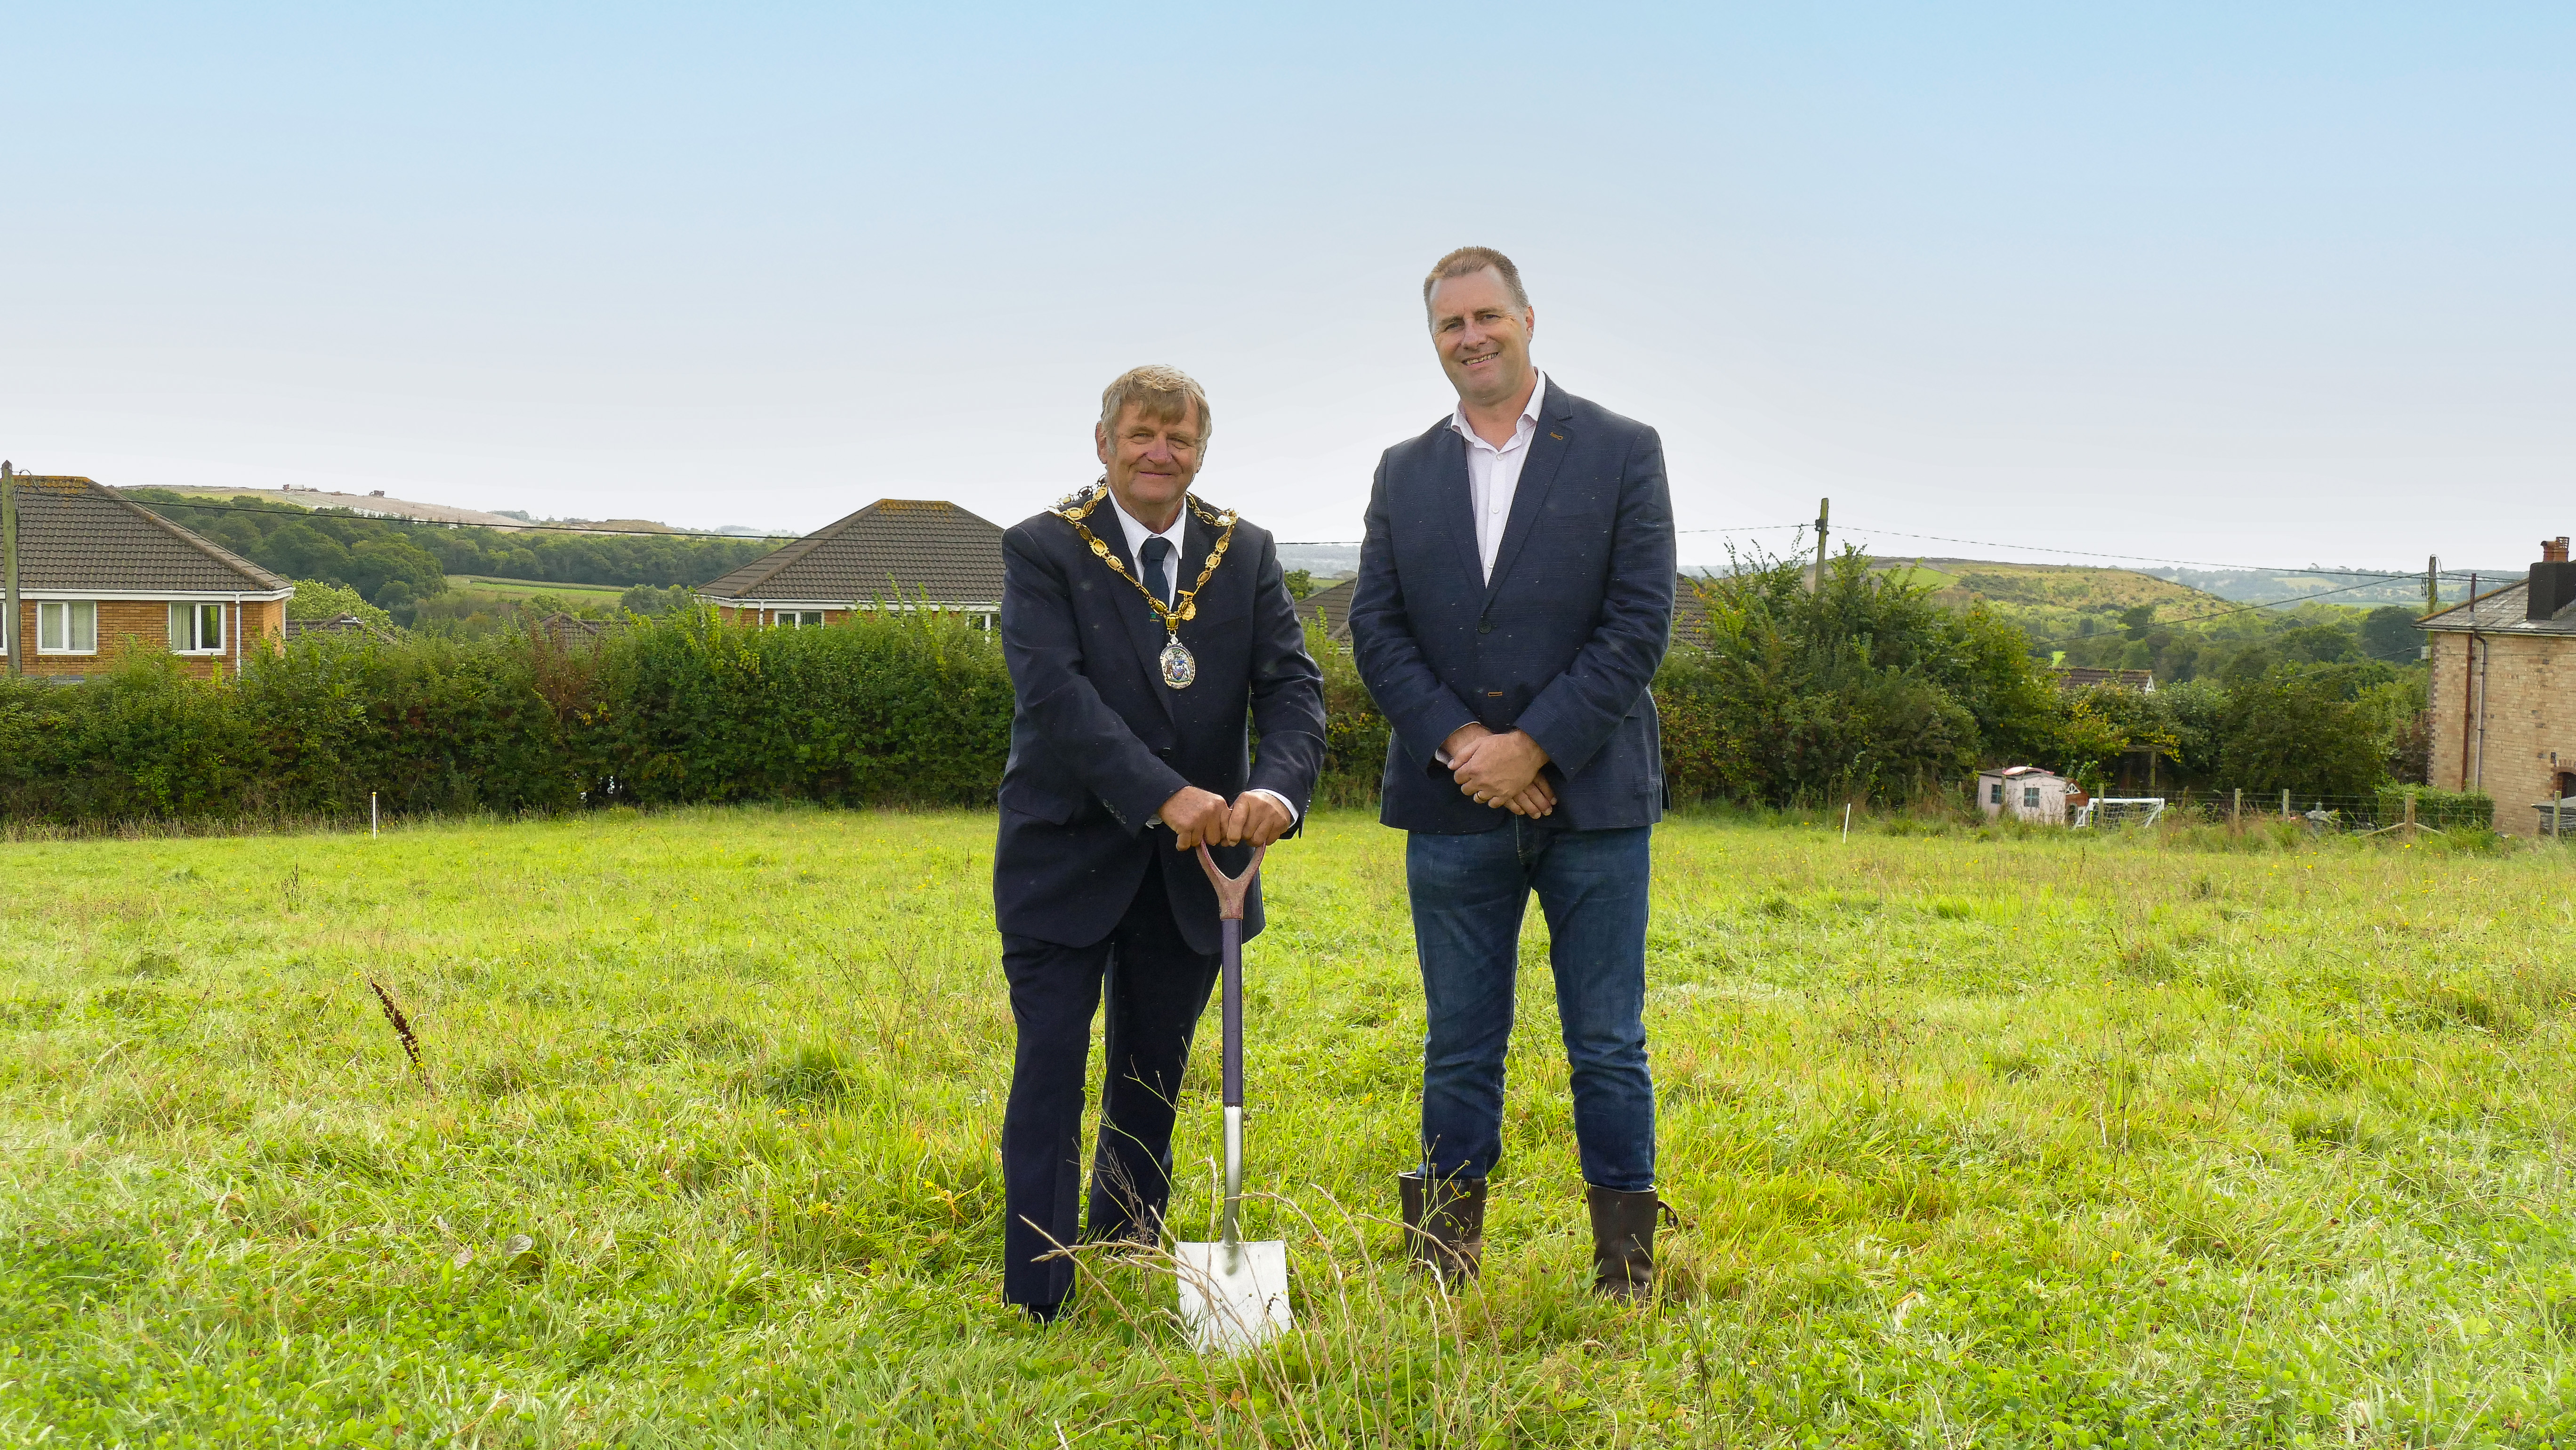 Councillor joins Baker Estates to break ground at new residential development in  Chudleigh Knighton which will benefit the local community by £1.7m